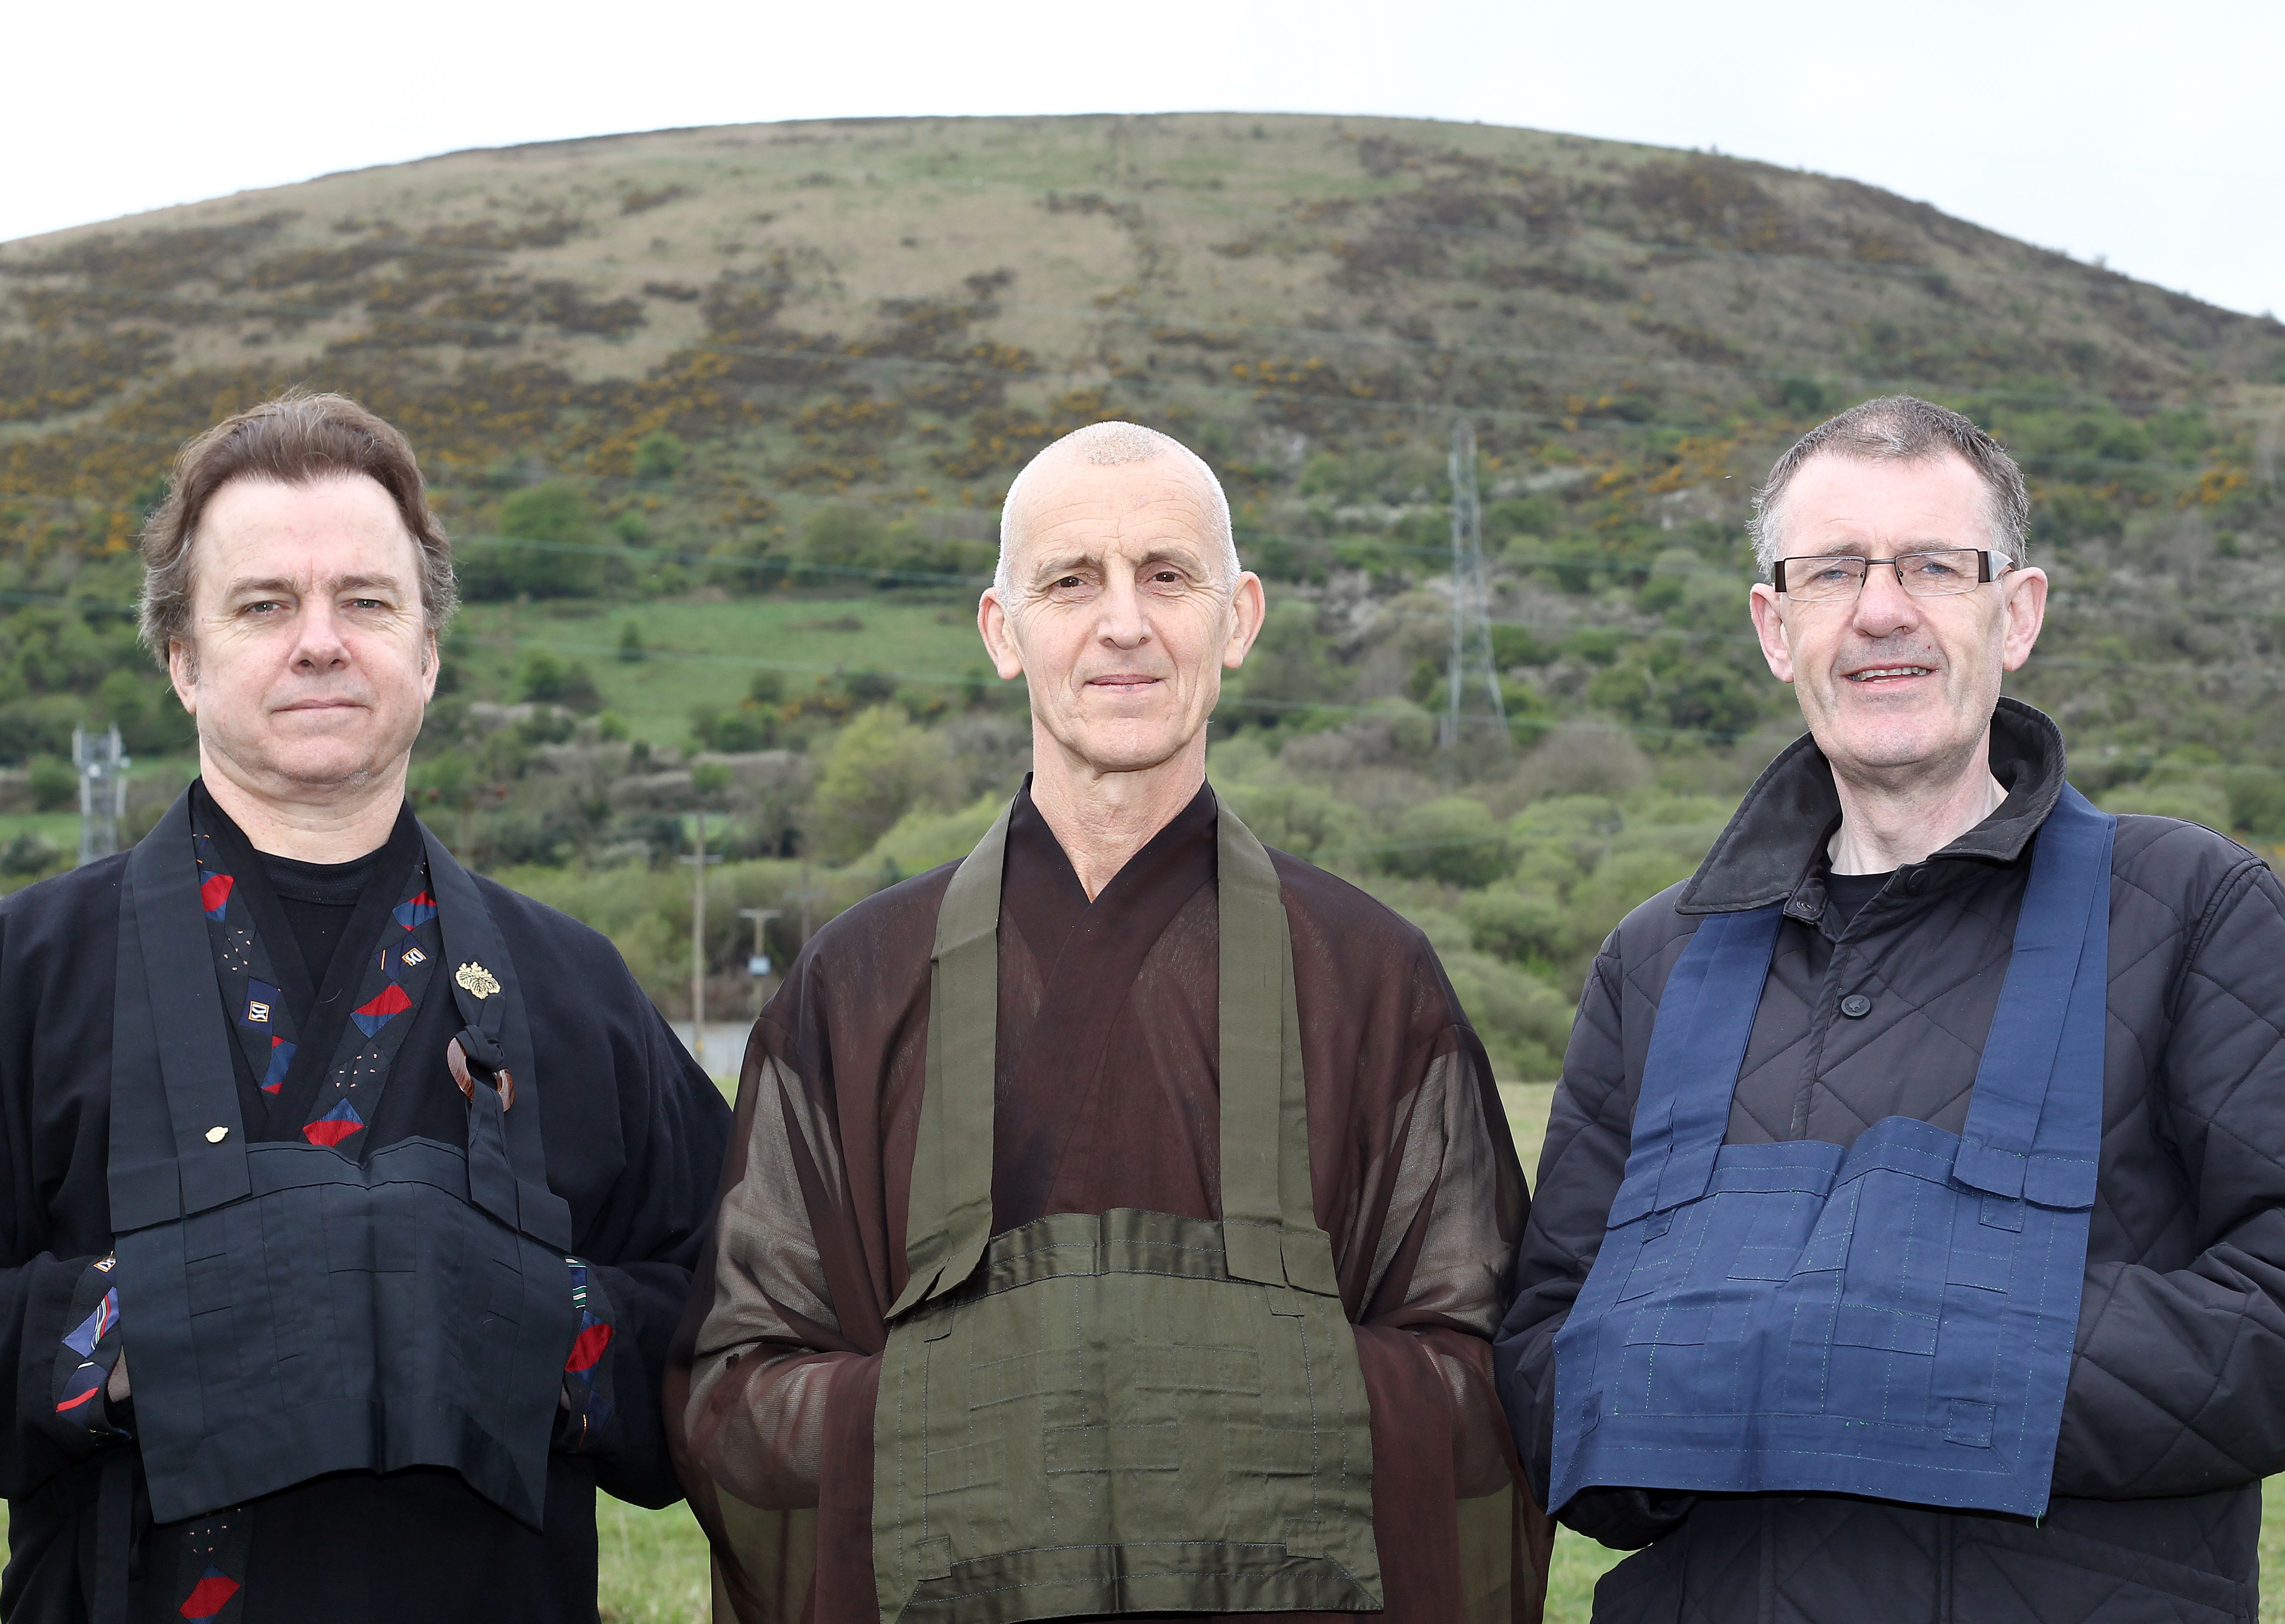 BUDDHIES: The author (right) with Paul Haller (centre) and Michael O\'Keefe on the slopes of the Black Mountain